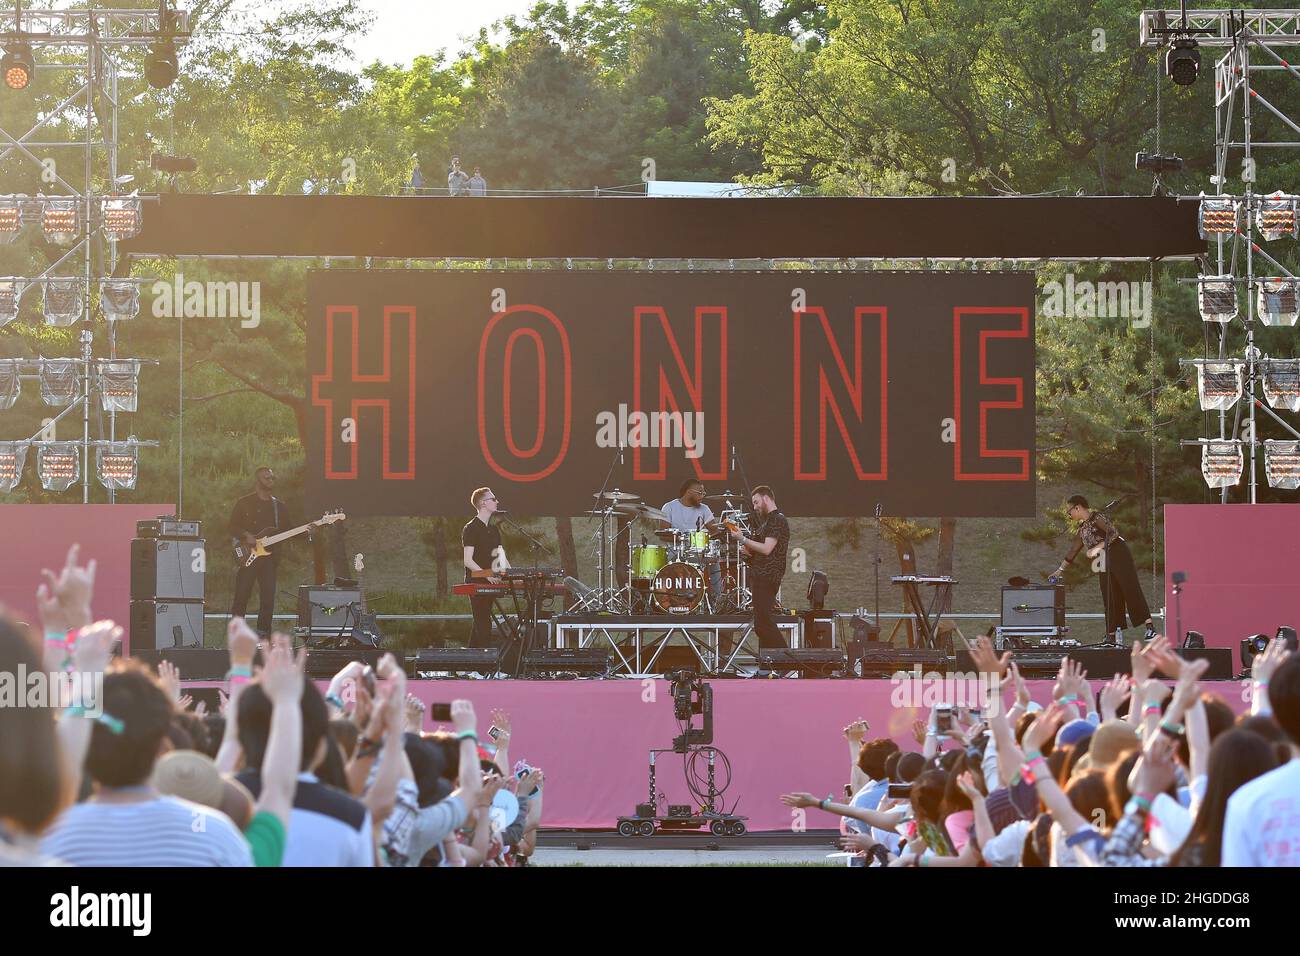 Honne performs on the stage during an Seoul Jazz Festival 2017 at Olympic Park in Seoul, South Korea. Seoul Jazz Festival, a local festival that has grown into a representative spring festival over a decade, will take place at Seoul Olympic Park on May 27 and 28. This year the festival invited many prominent jazz artists including Jamiroquai, a British funk and acid jazz band, which returns to Seoul for the first time in four years. The Grammy Award-winning band with a large local fan base will play classic disco-funk from their new album 'Automaton.' Jazz diva Dianne Reeves, R&B-based jazz bi Stock Photo